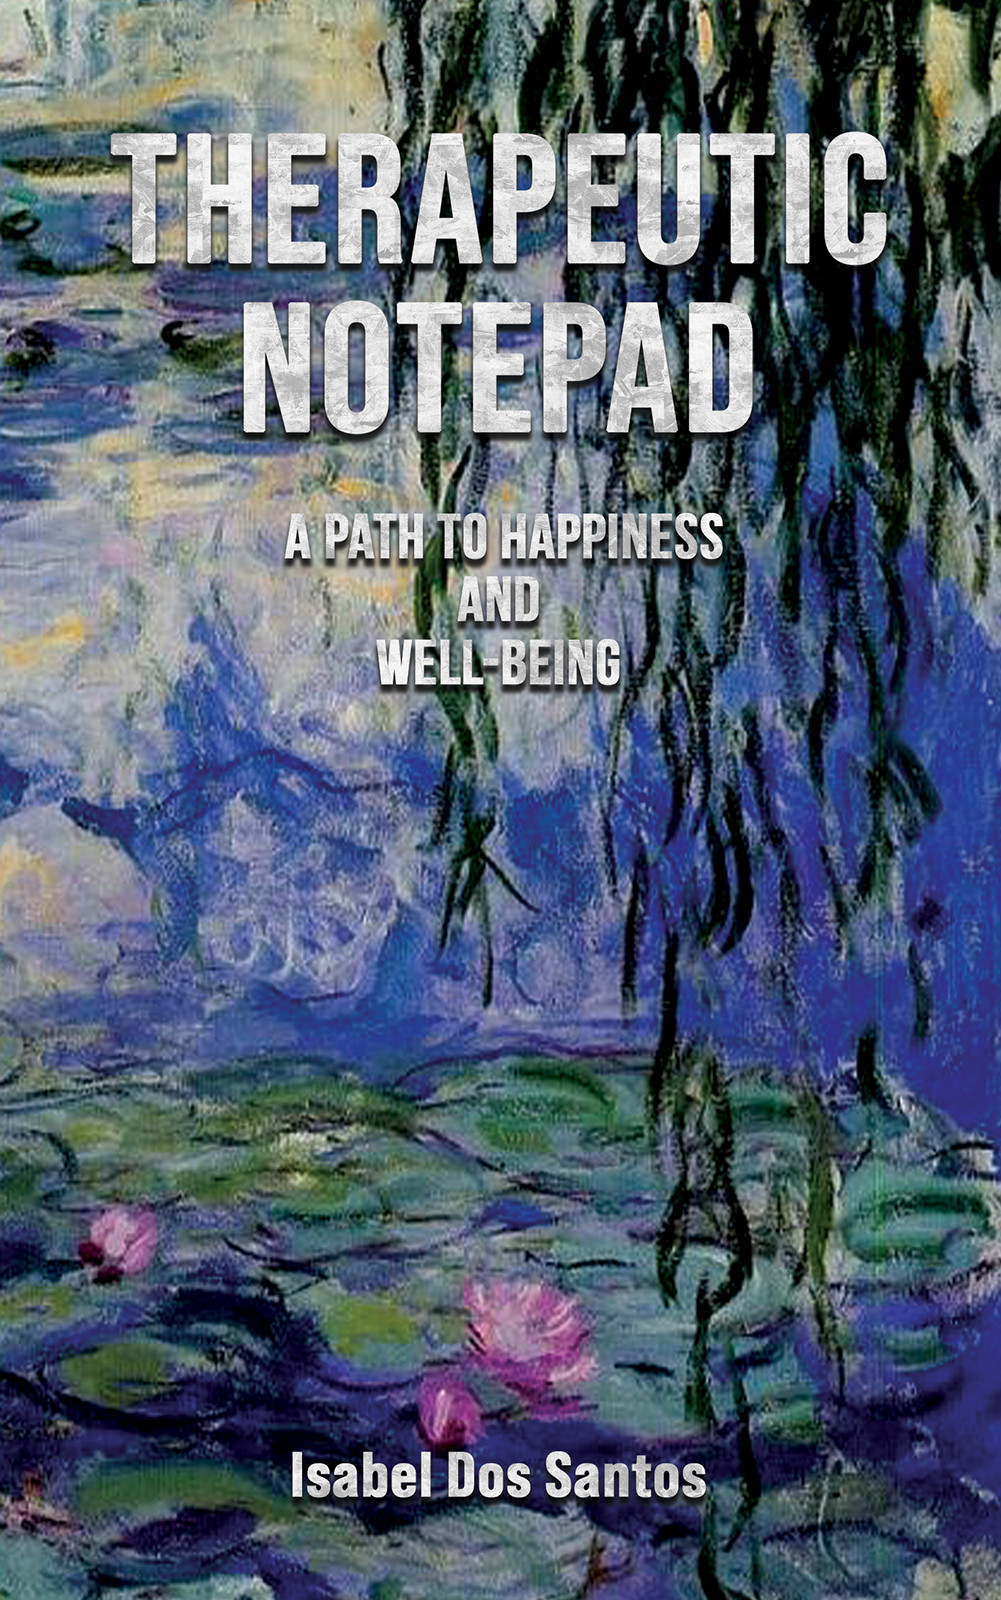 Therapeutic Notepad: A Path to Happiness and Well-Being-bookcover